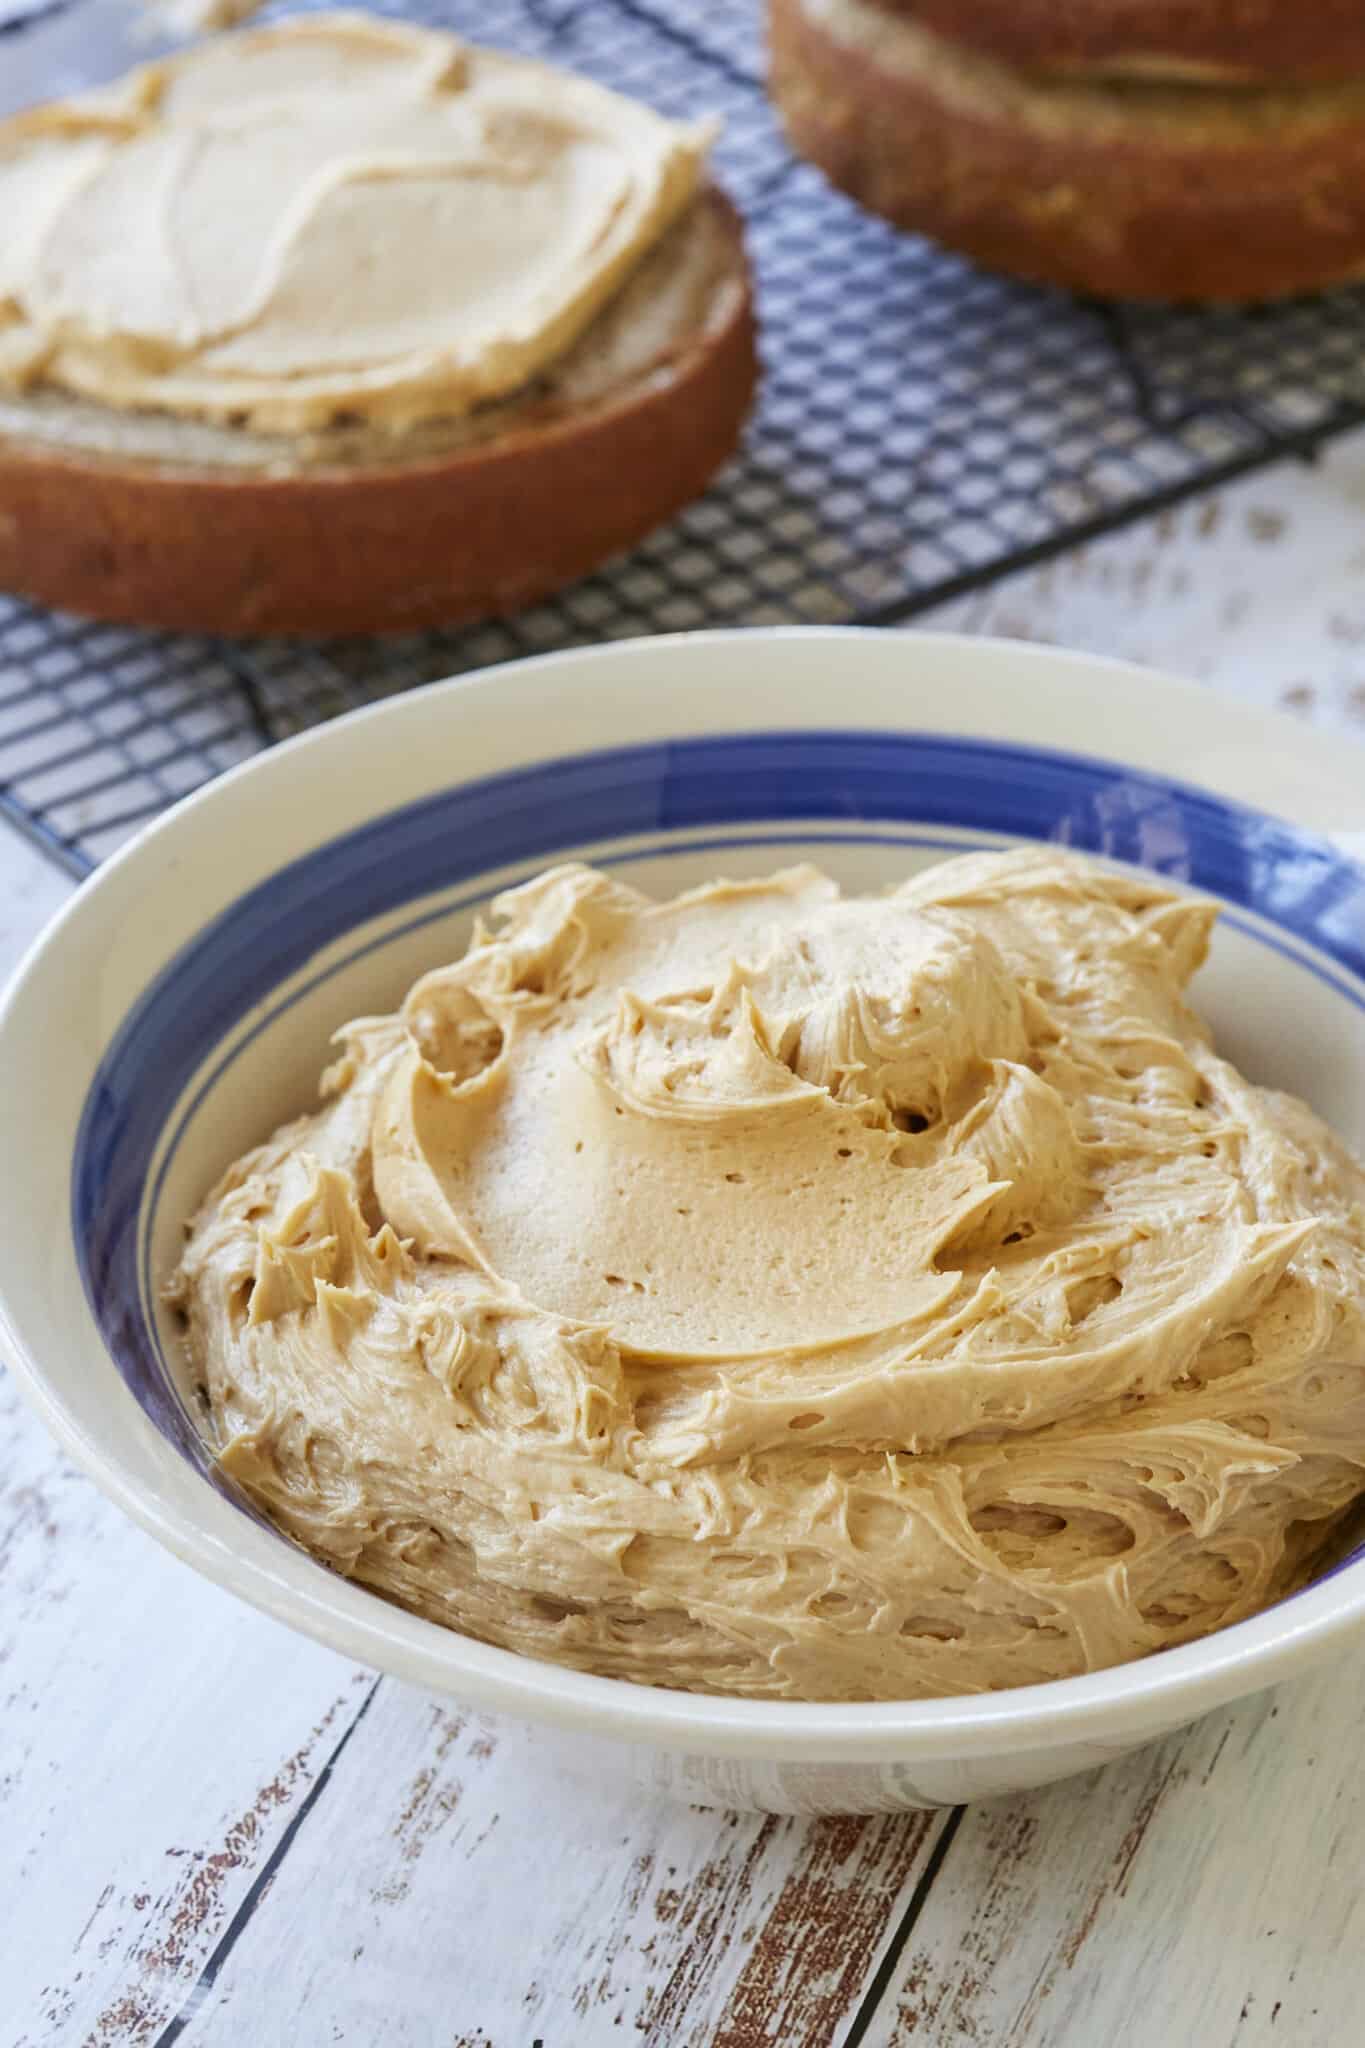 A close-up shot at a big bowl of smooth Salted Caramel Buttercream Frosting shows its creamy texture. Two round cake layers are on the cooling rack. One has been frosted. 